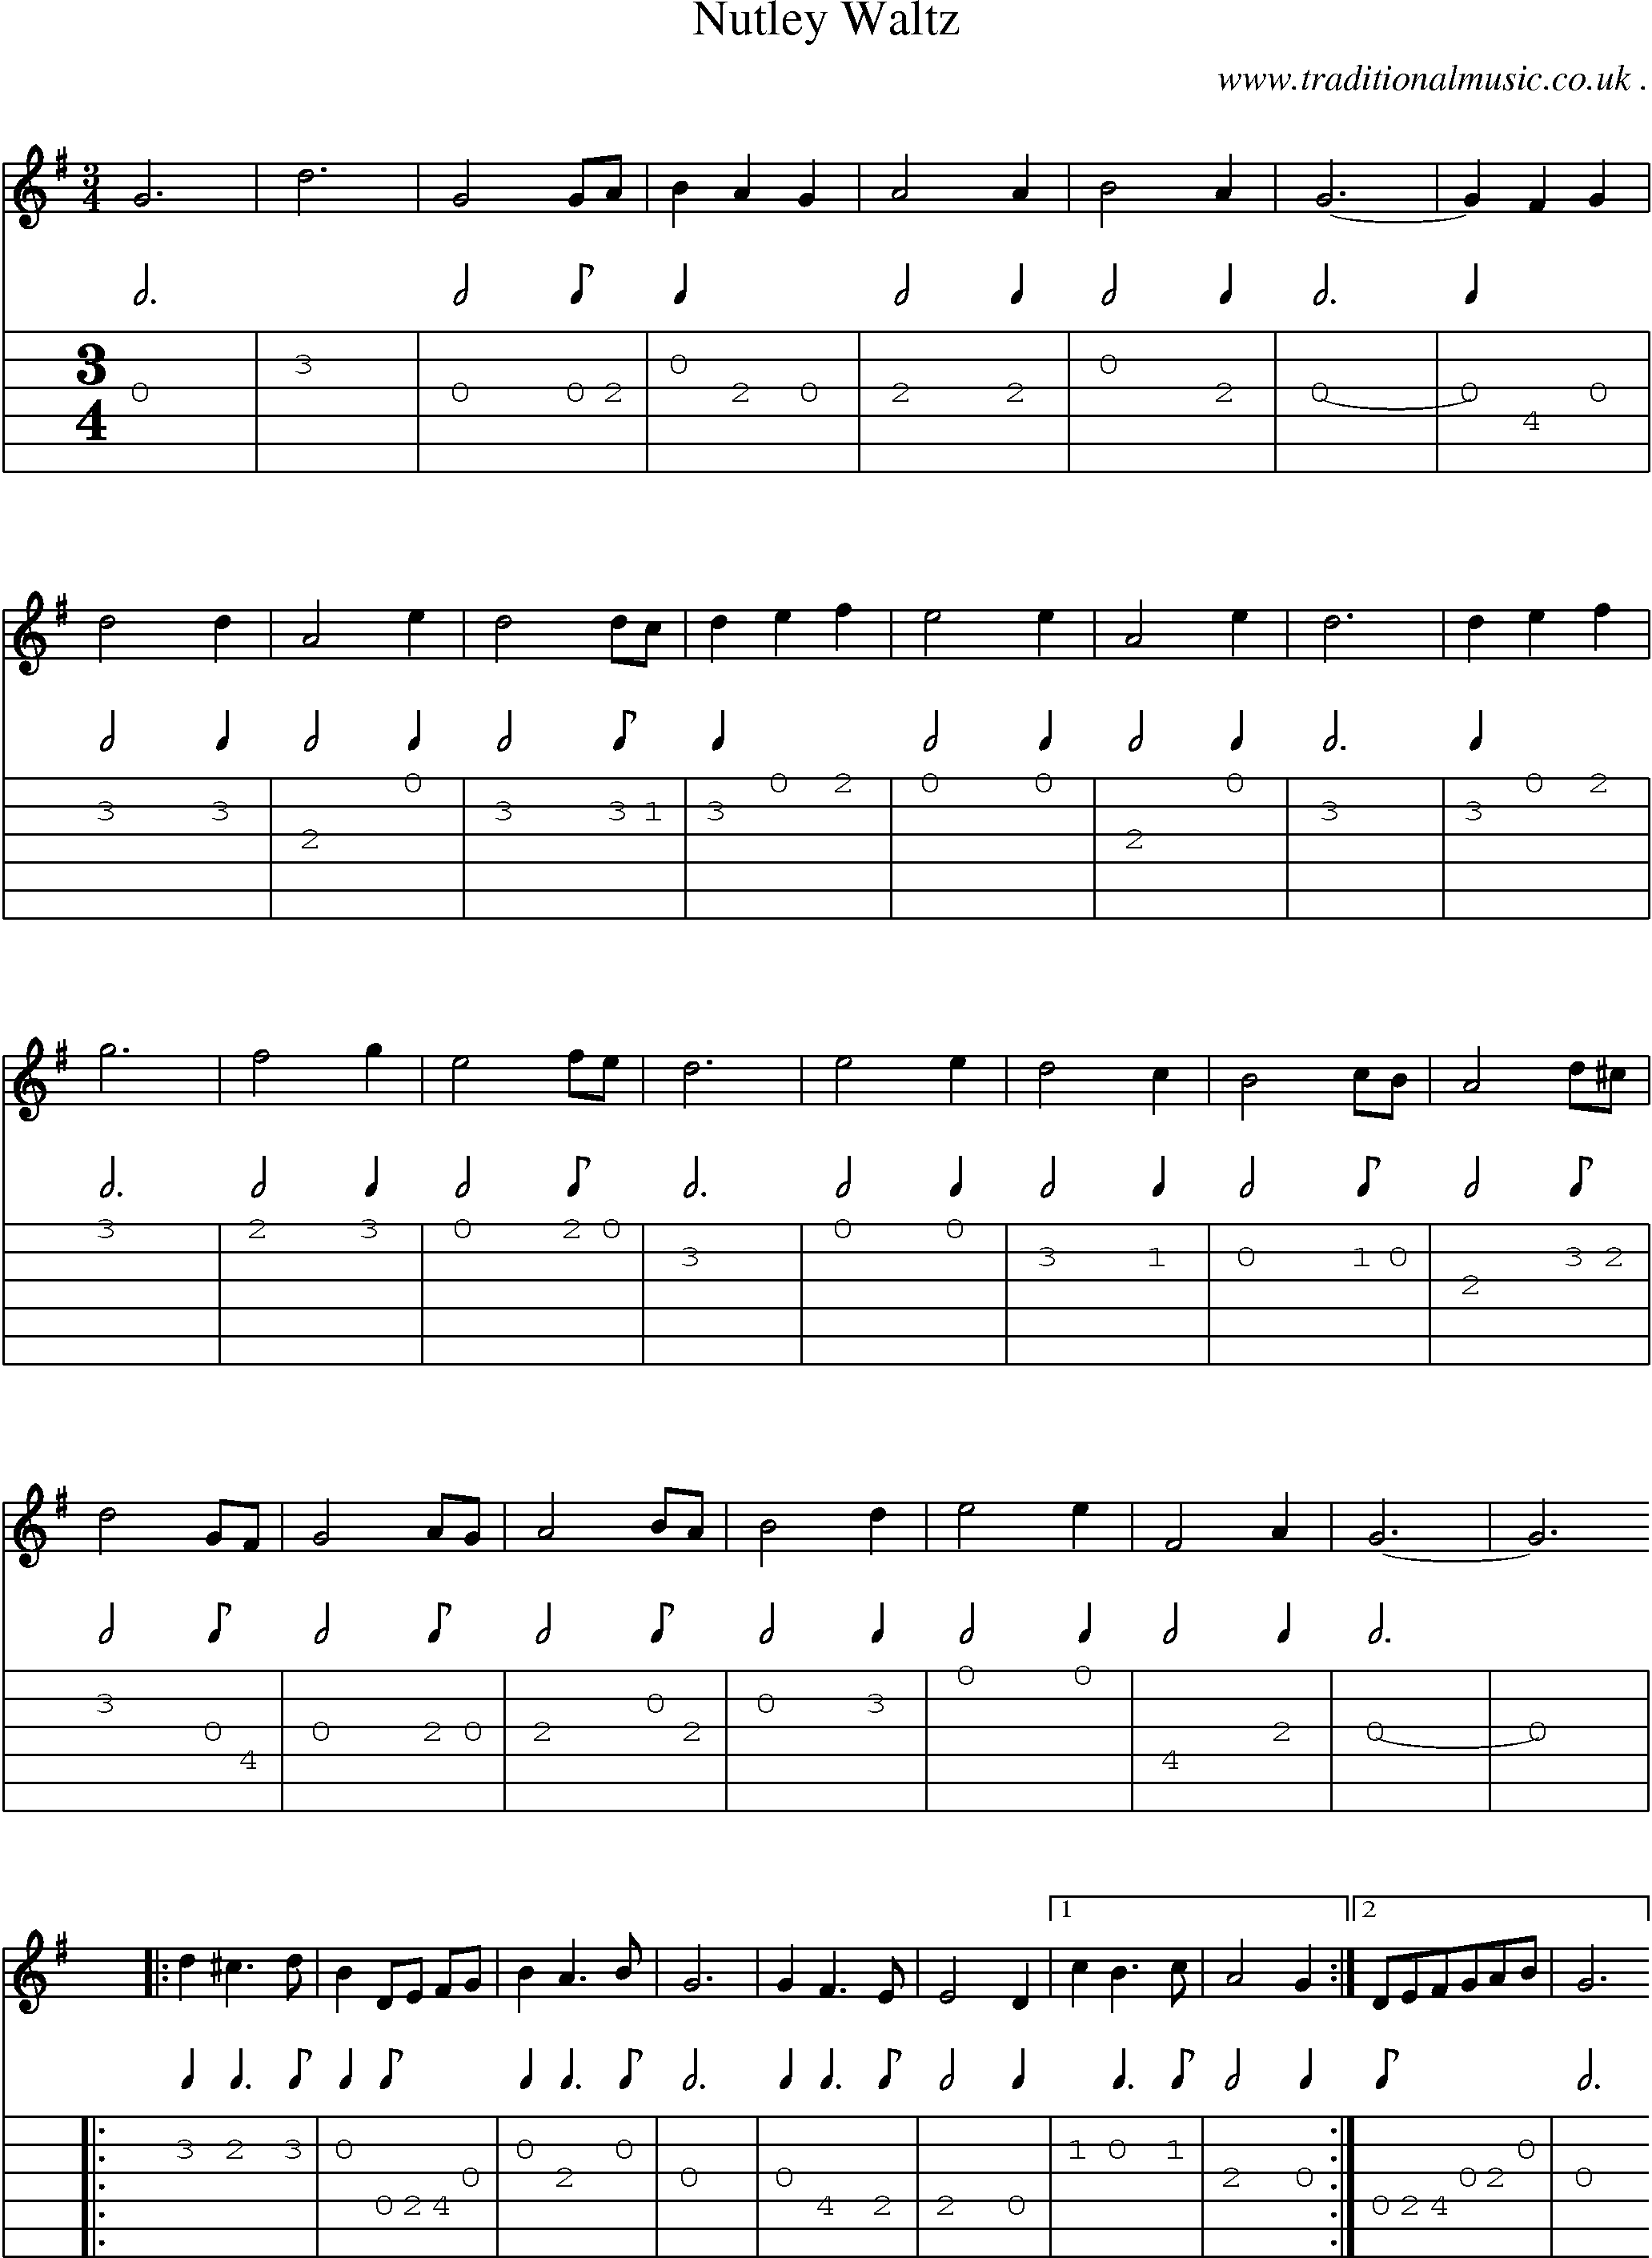 Sheet-Music and Guitar Tabs for Nutley Waltz